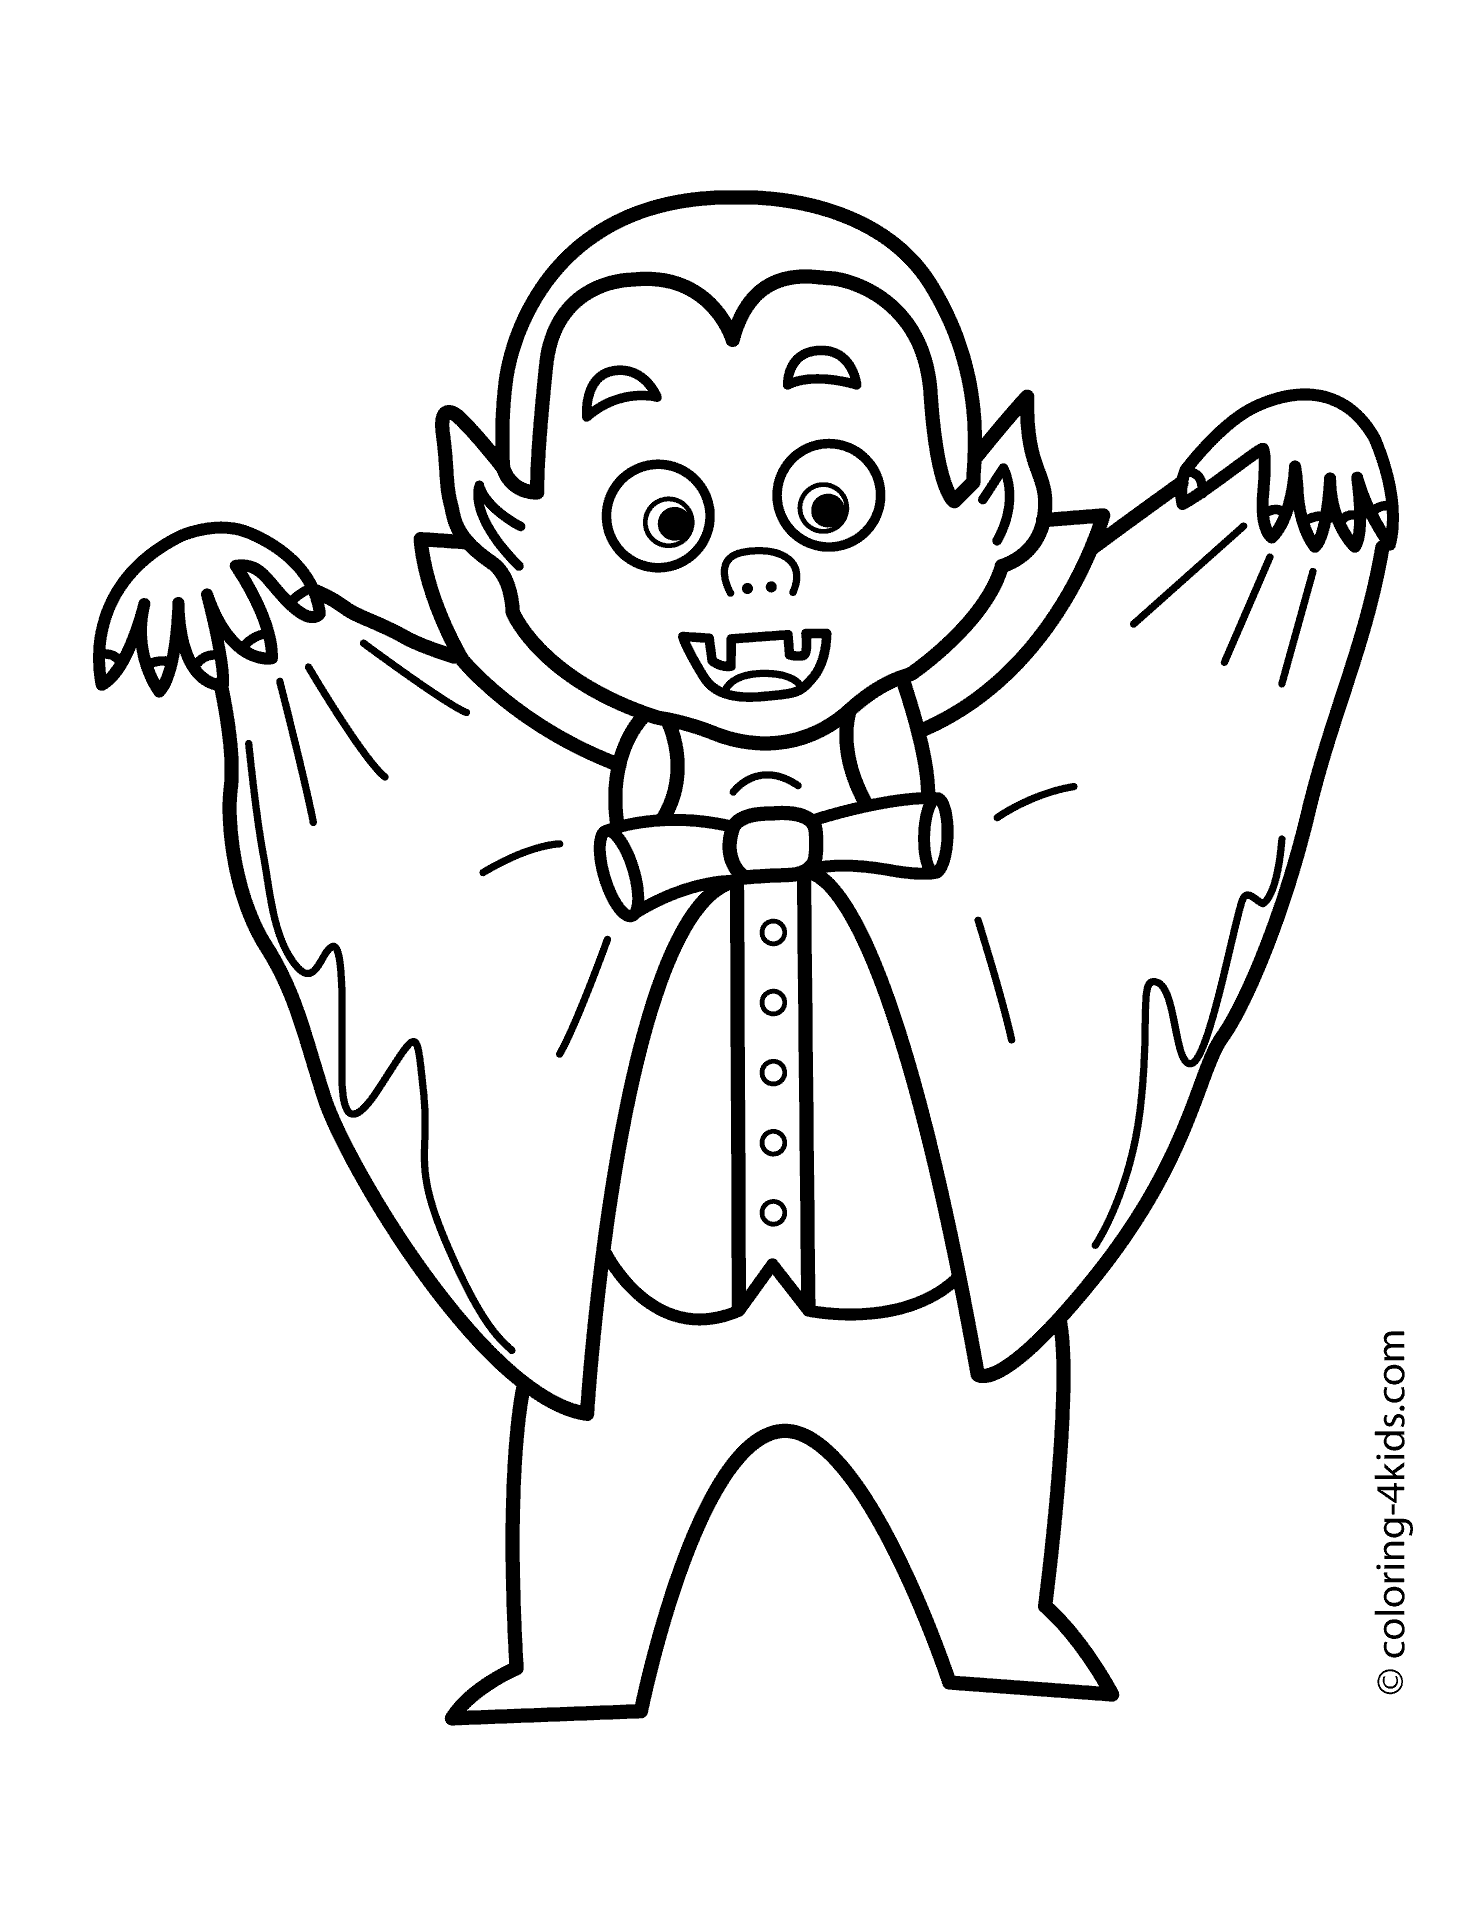 Black And White Vampire Coloring Pages - Ð¡oloring Pages For All Ages